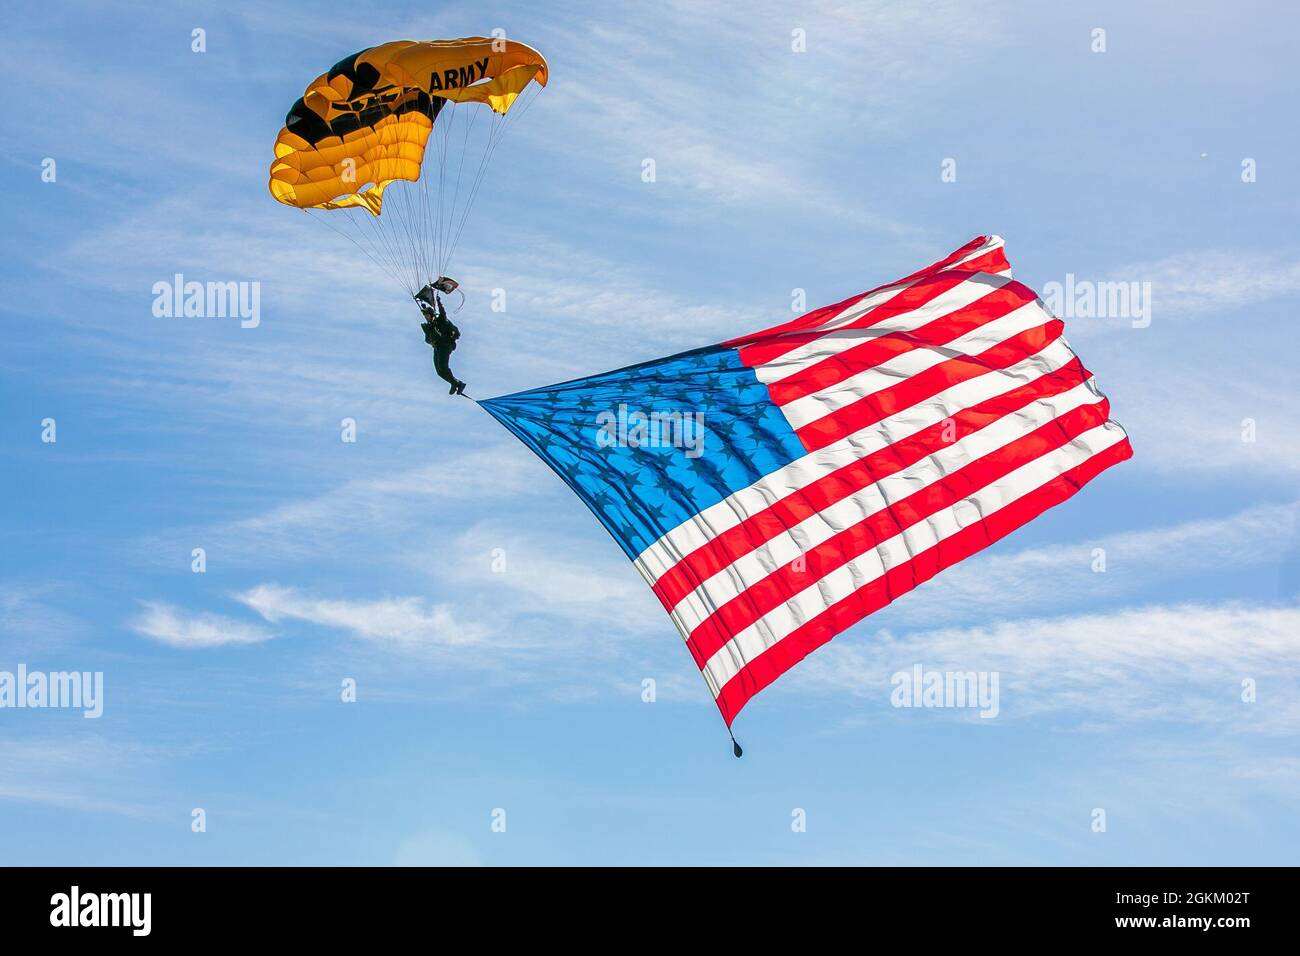 Staff Sgt. Dominic Perry makes a jump with the American flag banner over Laurinburg-Maxton Airport. Stock Photo